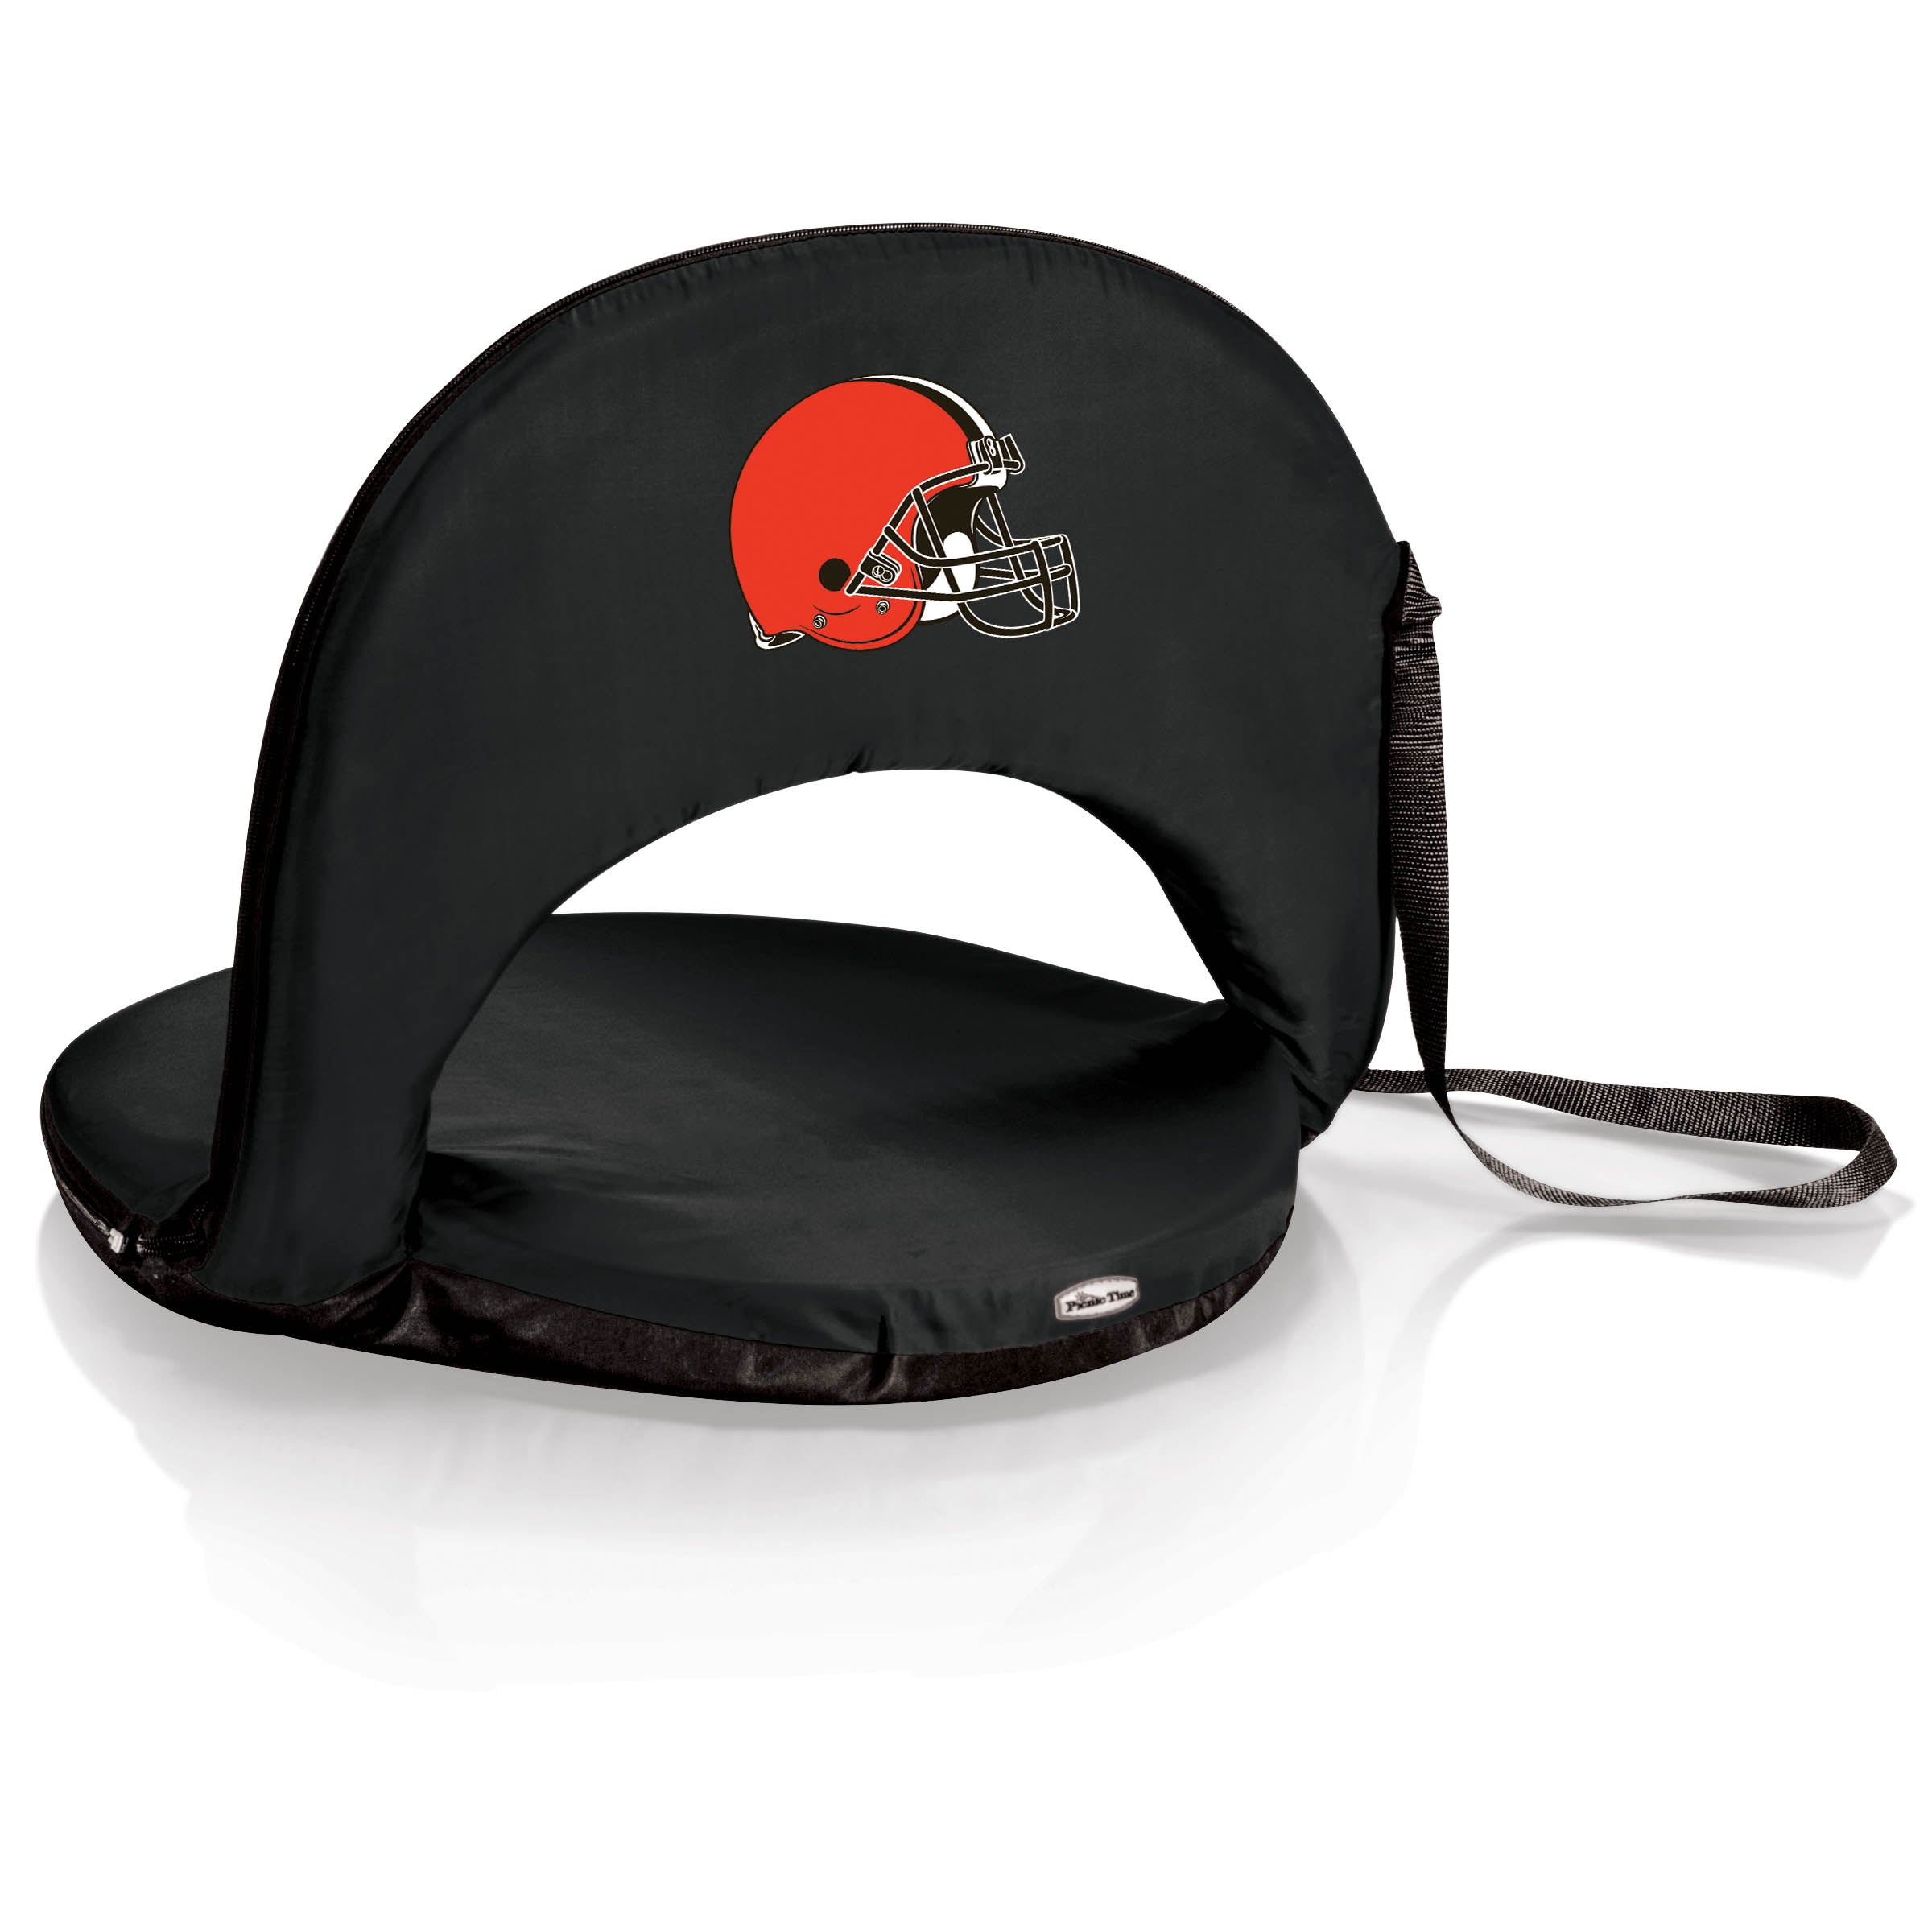 Cleveland Browns - Oniva Portable Reclining Seat